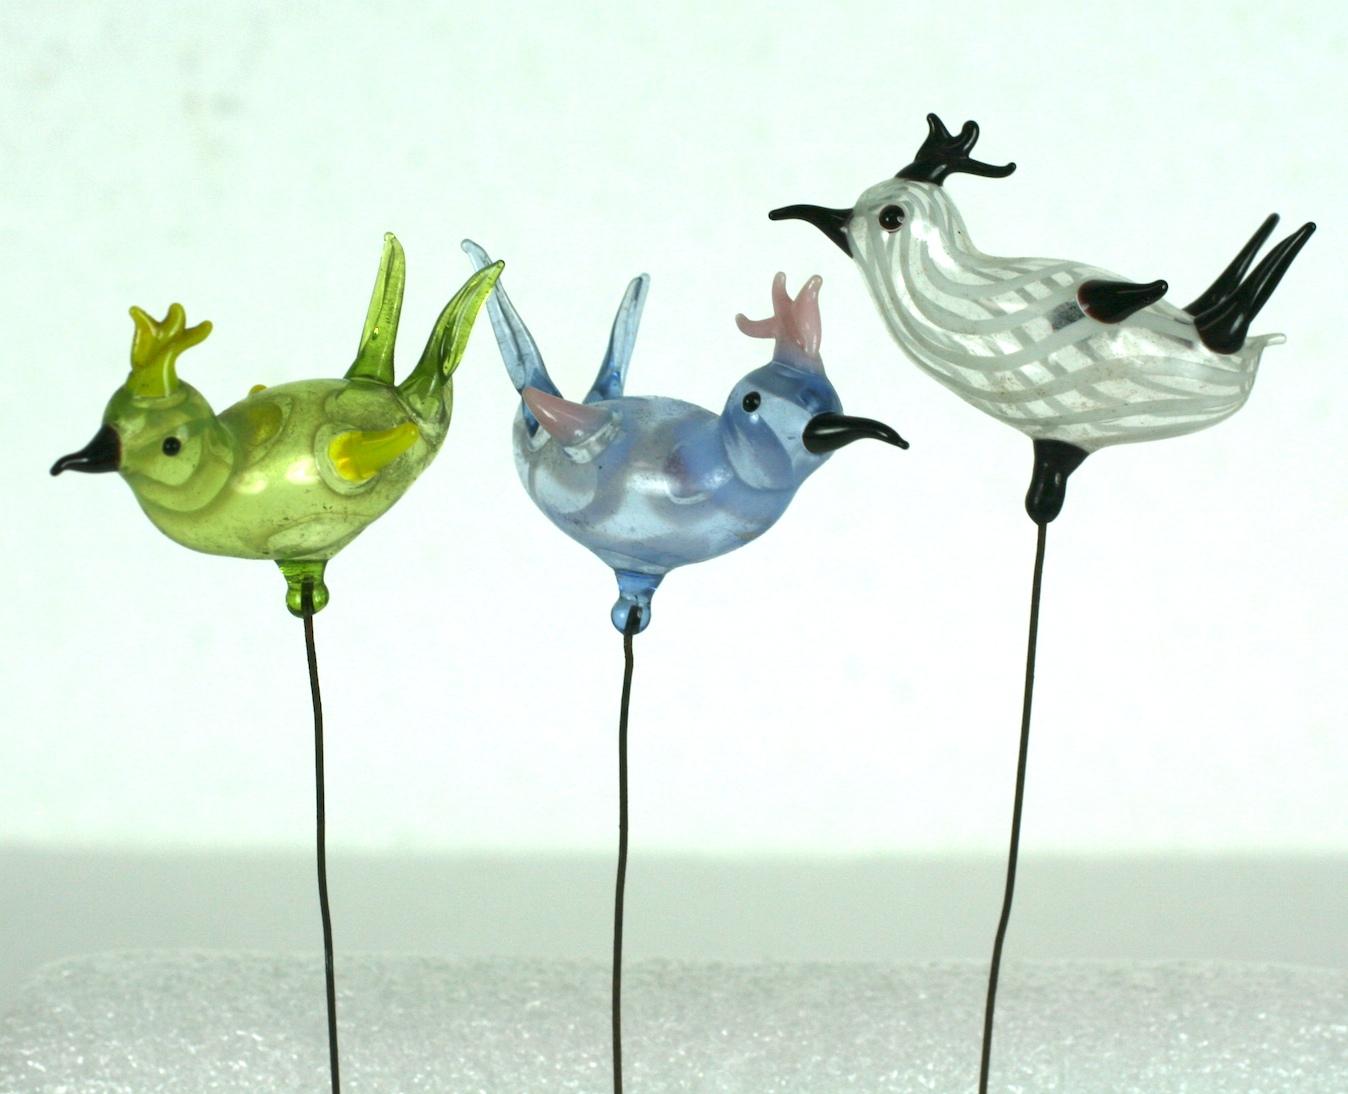 Bimini hand blown birds on metal staffs from the Art Deco area. One each in blue, Lime green and striated white, would work beautifully in a diorama, 1920s, Germany.
Measures: Birds 5